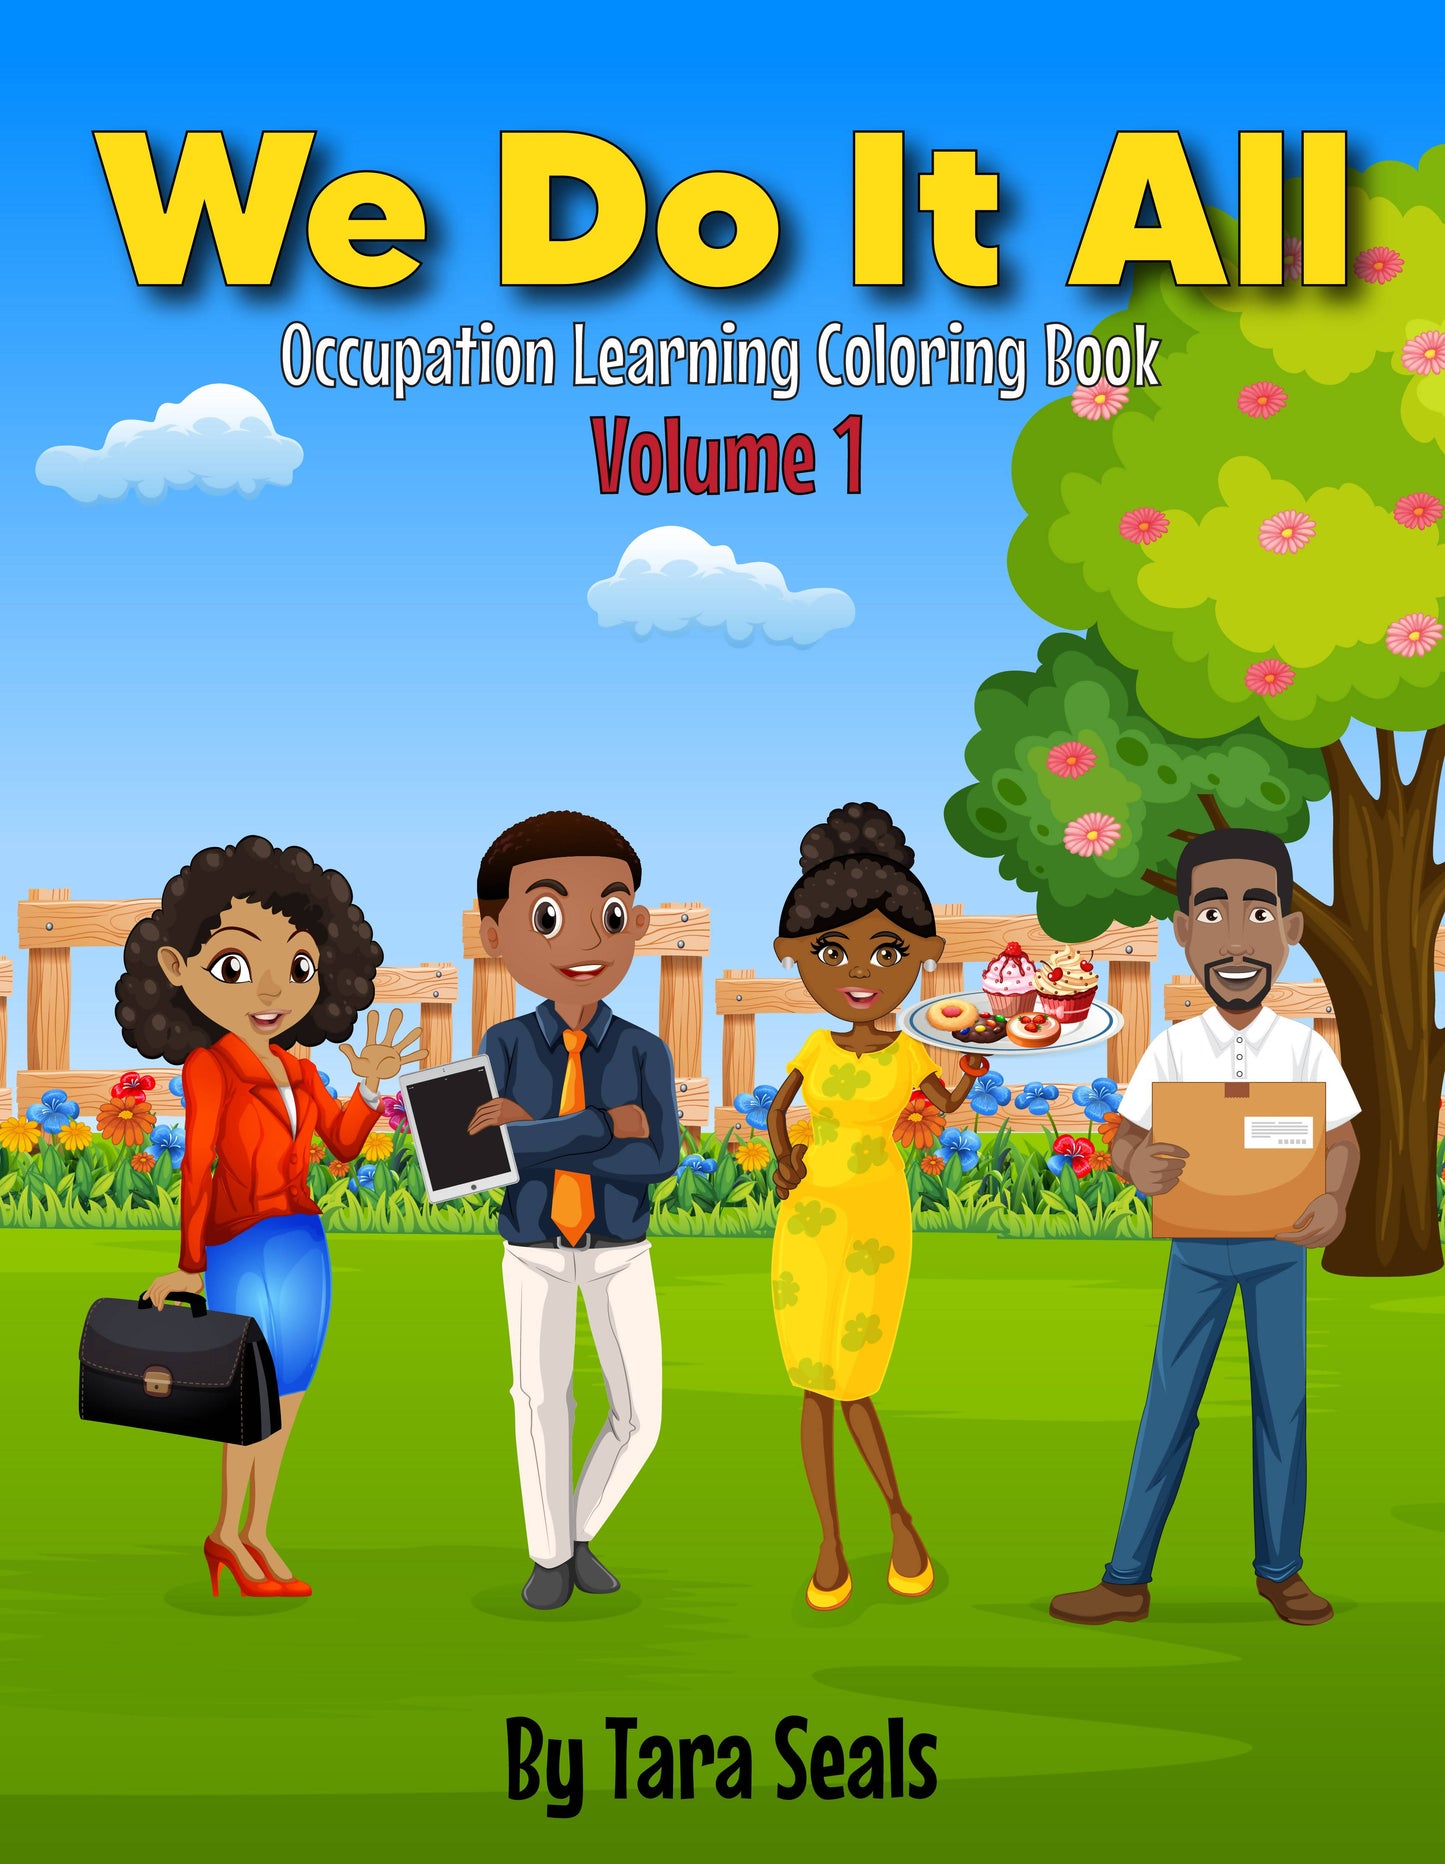 We Do It All Occupation Learning Coloring Book